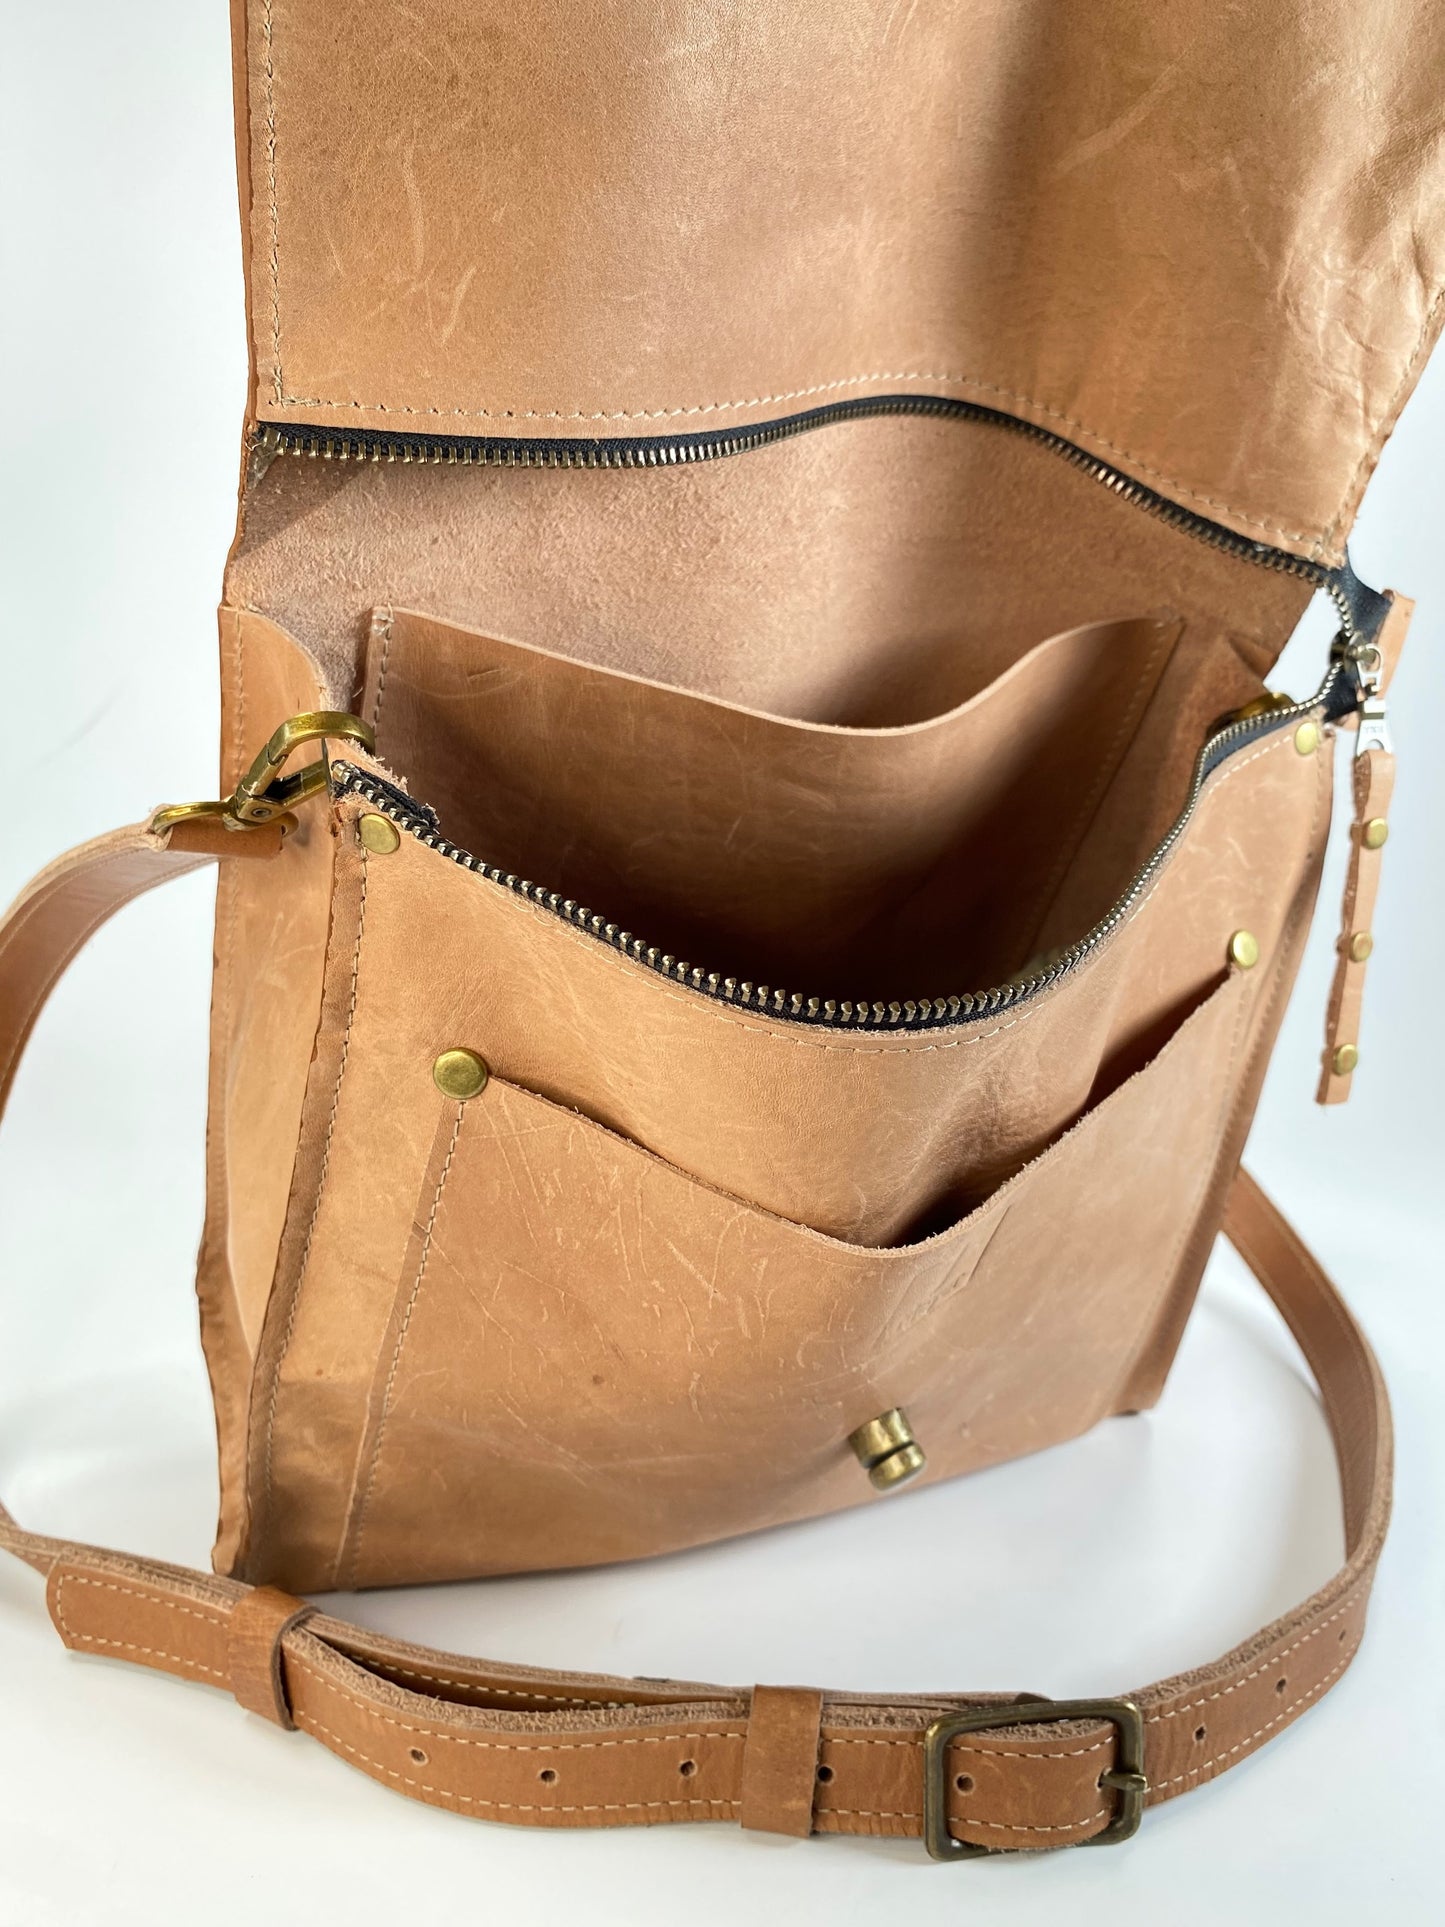 Leather Satchel Purse Hand Stitched in Demure Tan